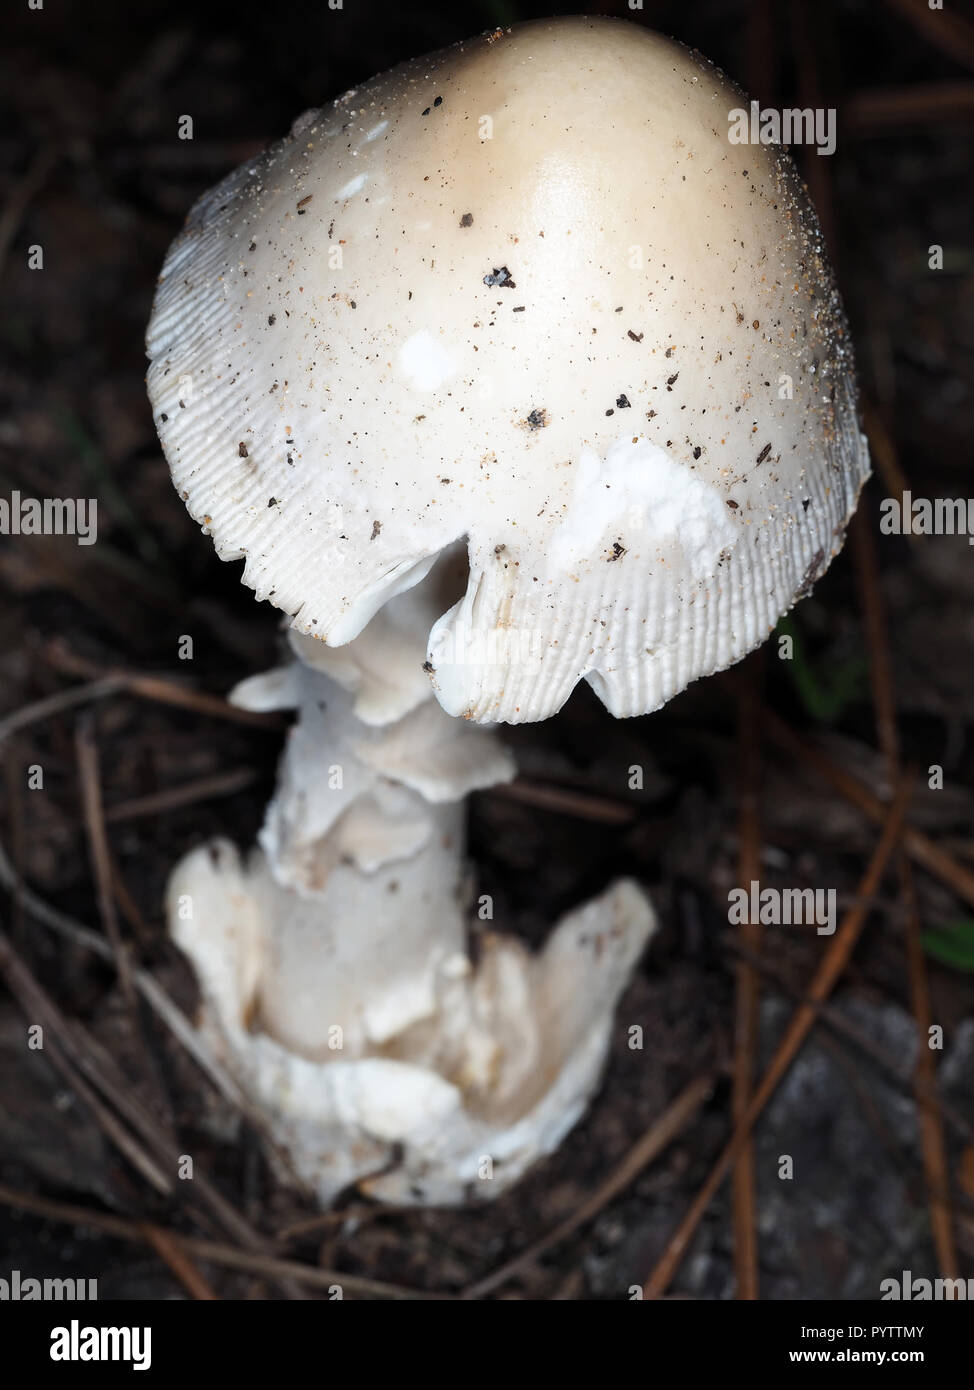 White Amanita mushroom growing in a forest in Texas, USA Stock Photo